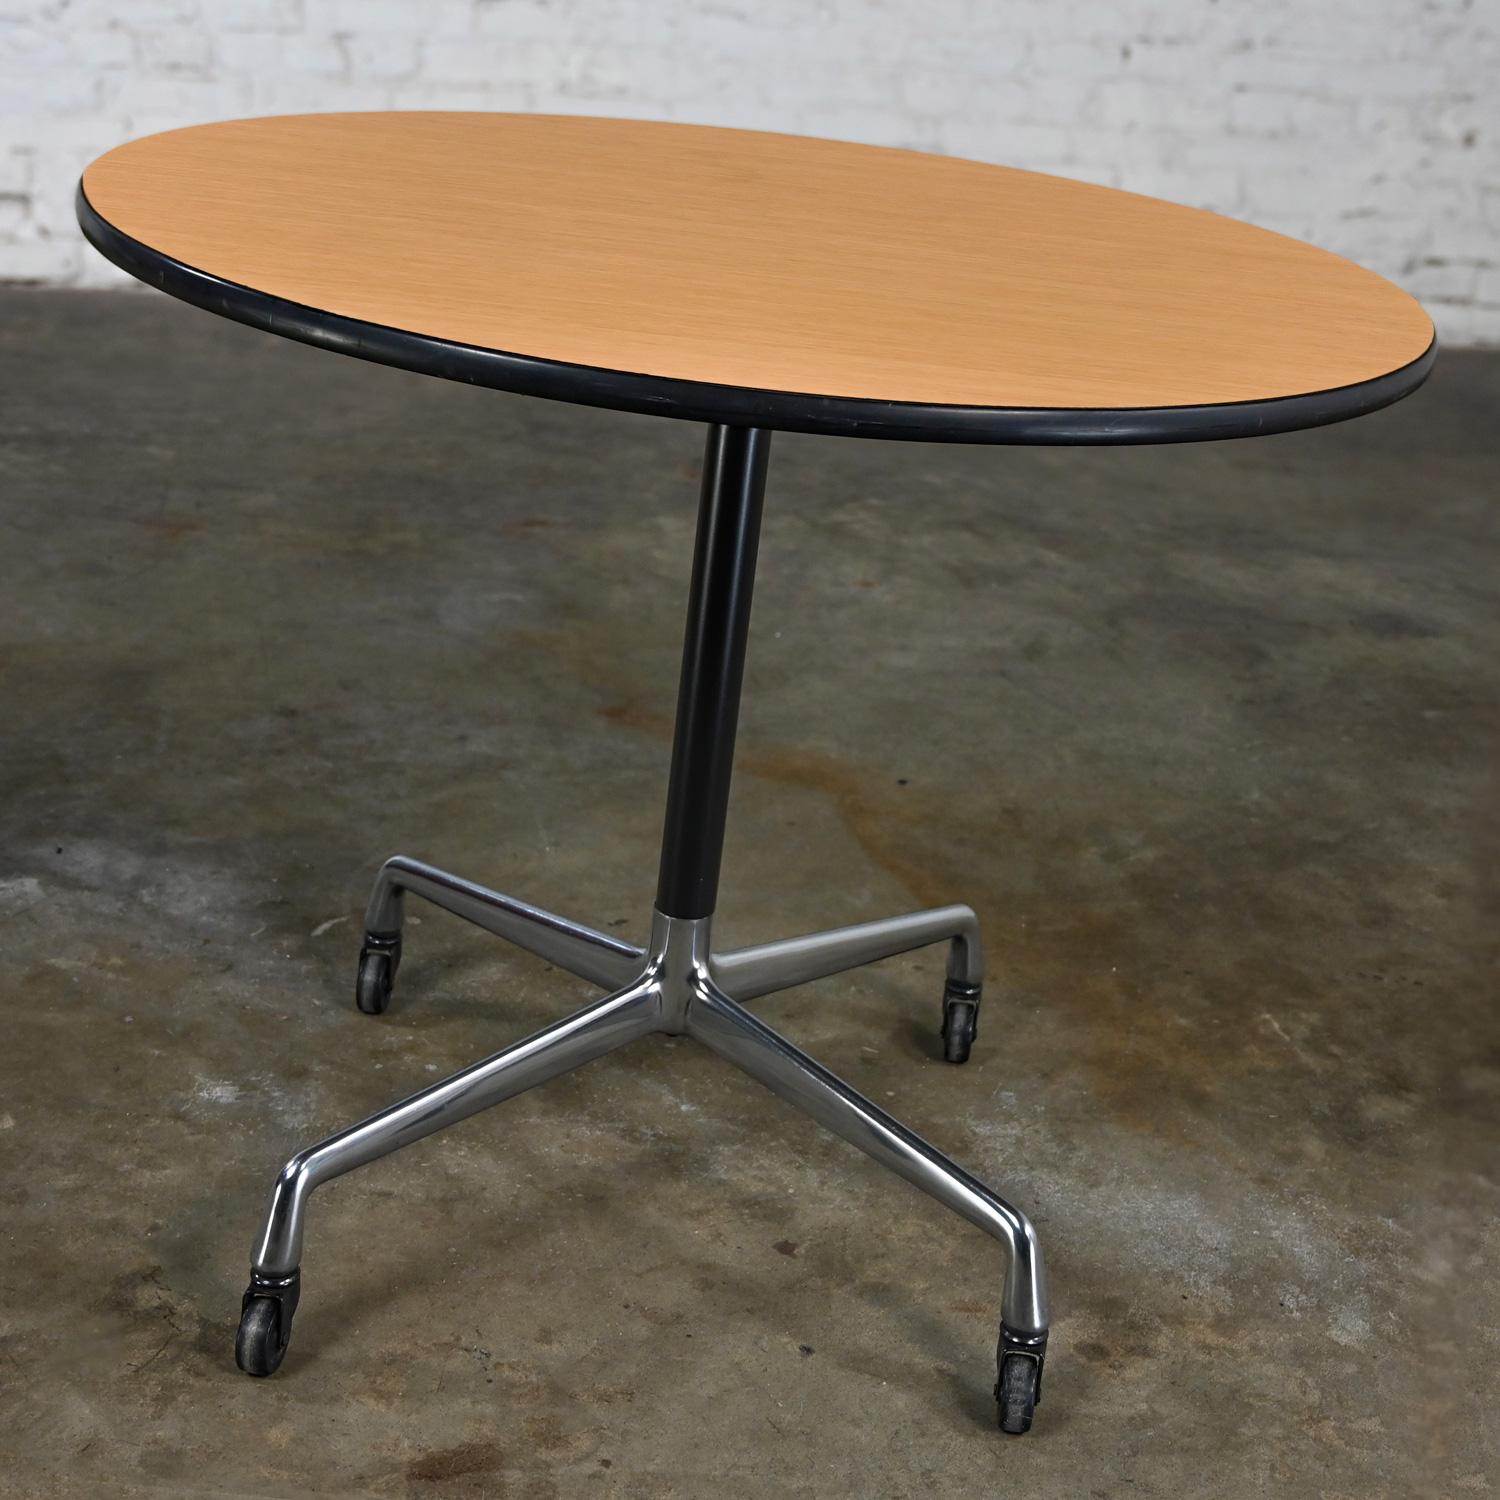 Handsome vintage Mid-Century Modern Eames for Herman Miller table with aluminum universal 4 prong base with black casters, black shaft, aluminum spider attachment, and a 36” round blonde laminate top with black vinyl edges. Beautiful condition,